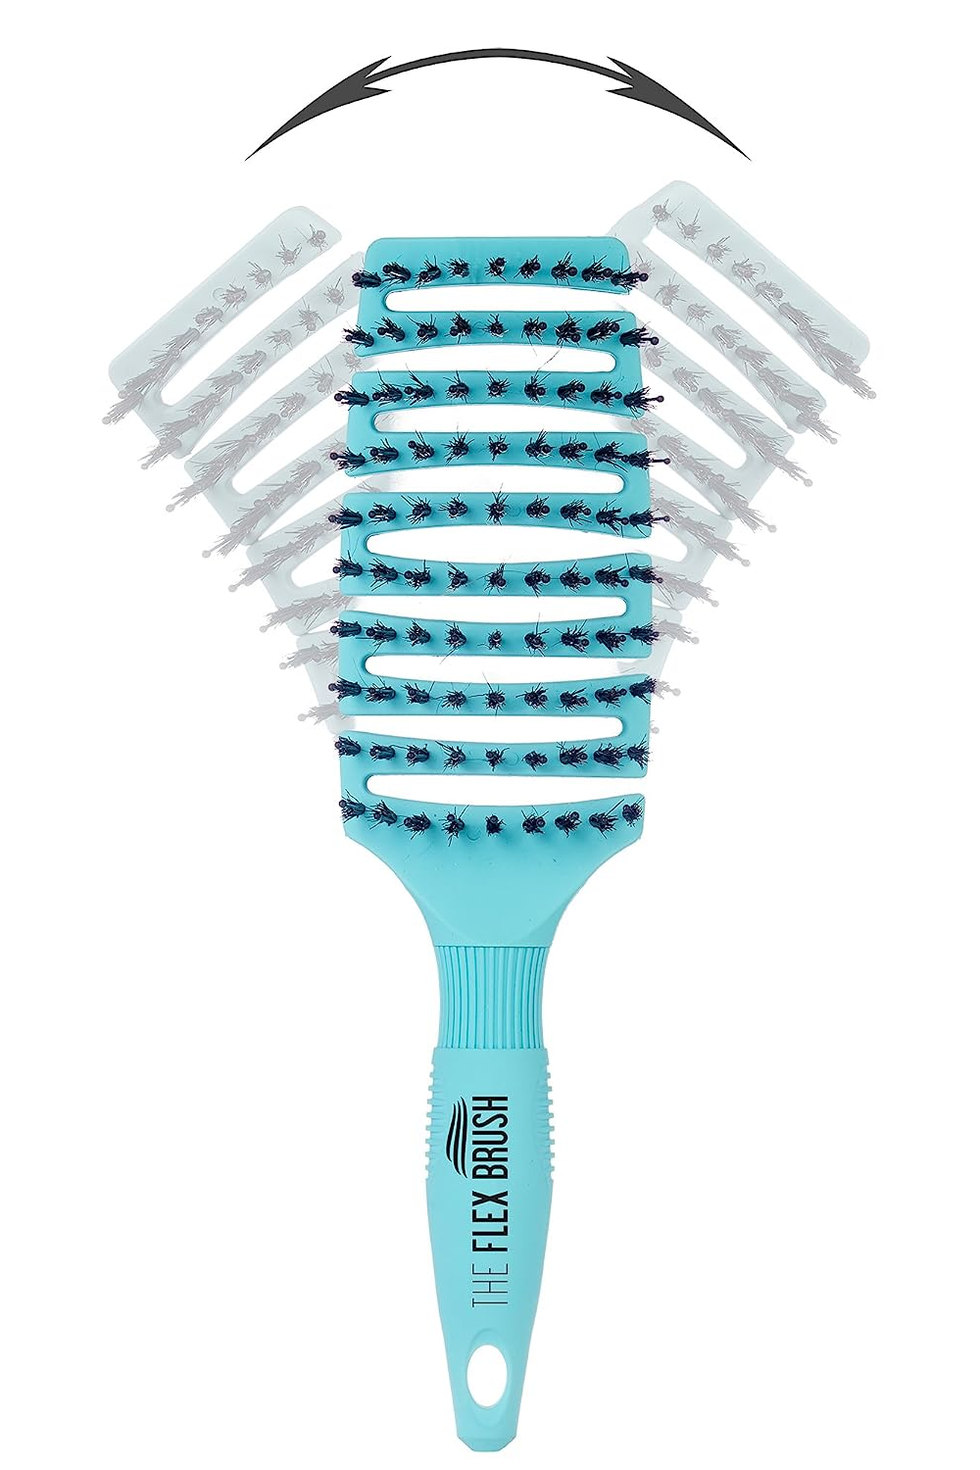 13 Best Boar-Bristle Brushes 2023, According to Hairstylists